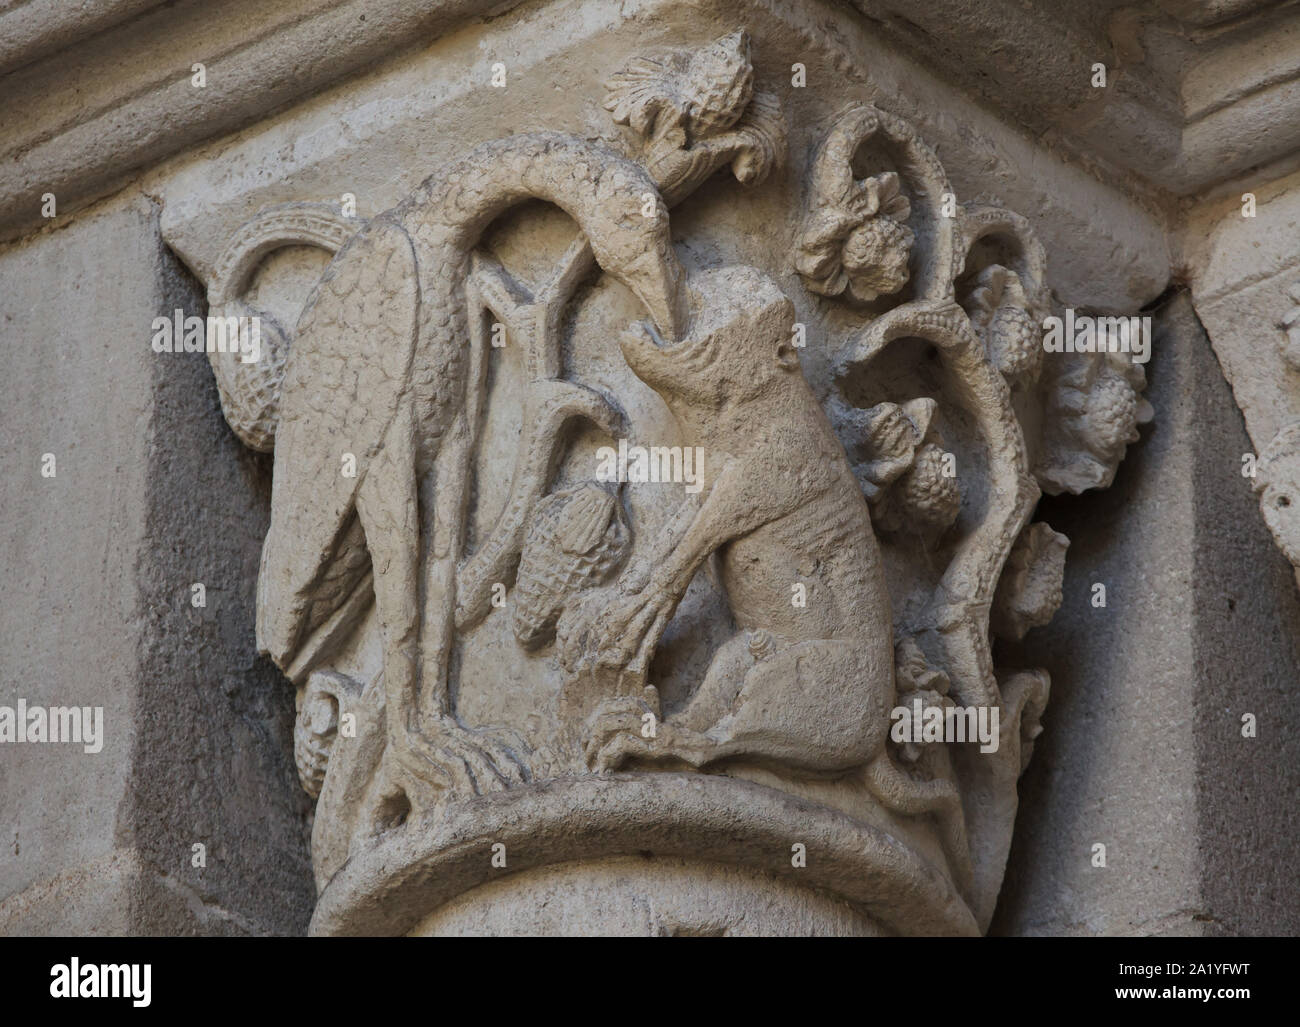 The wolf and the stork depicted in the Romanesque capital dated from the 12th century on the west portal of the Autun Cathedral (Cathédrale Saint-Lazare d'Autun) in Autun, Burgundy, France. The capital was probably carved by French Romanesque sculptor Gislebertus. Stock Photo